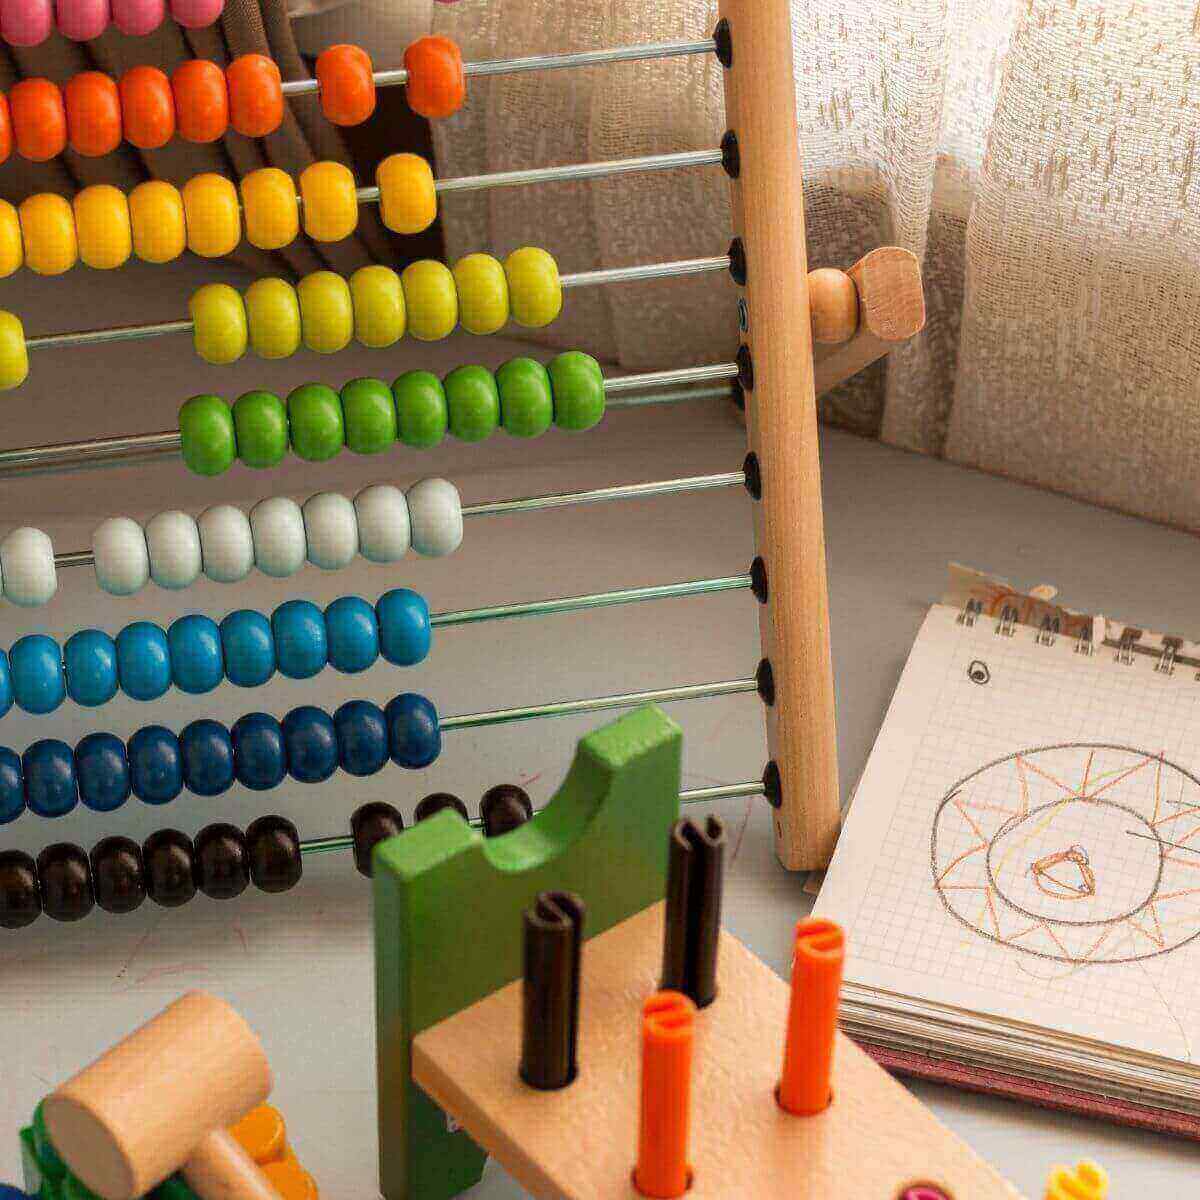 A wooden abacus sits on a table with pink, orange, yellow, green, white, light blue, dark blue, and black beads with a wooden mallet and a peg board.